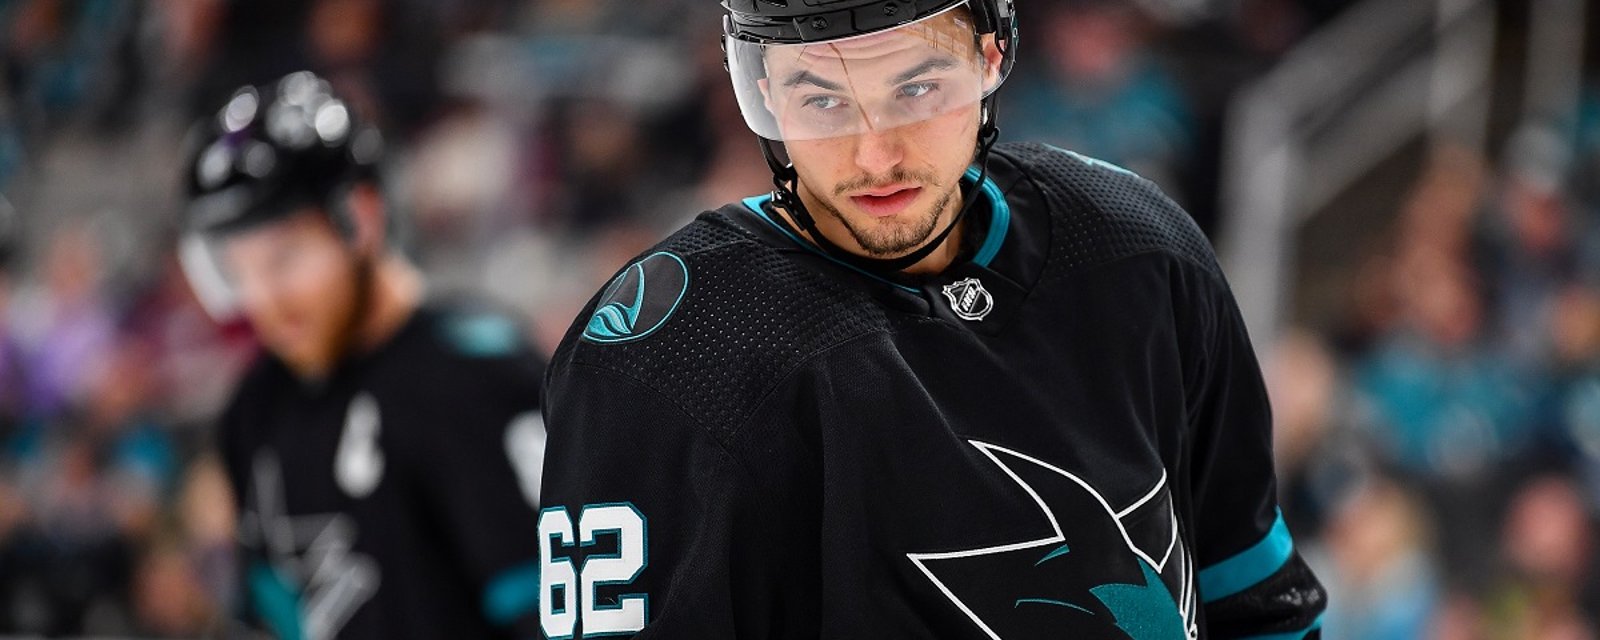 Sharks officially cut ties with 3 of their players.